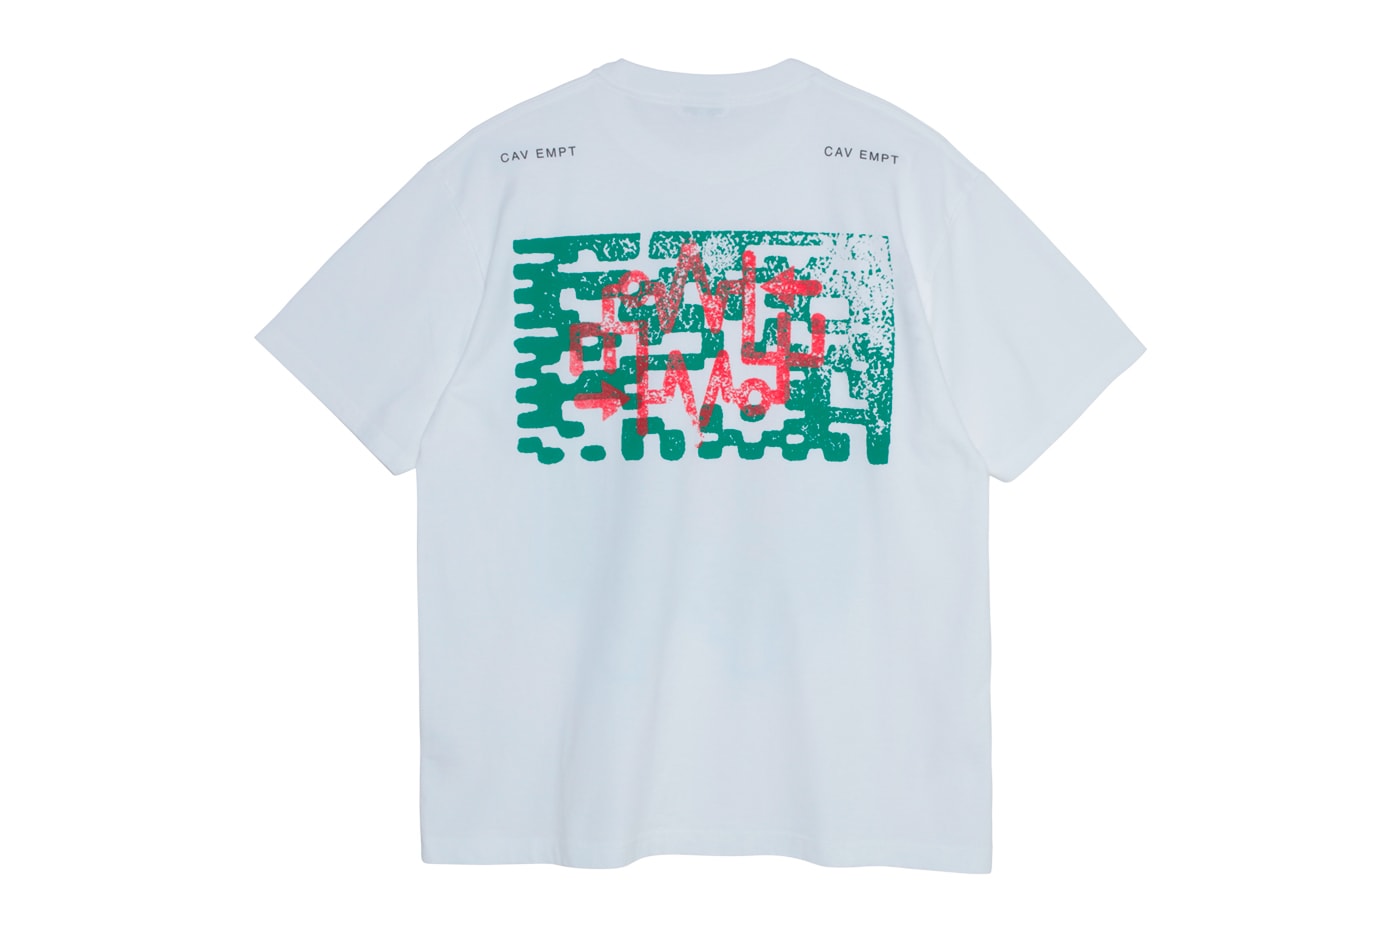 Cav Empt Drop 14 Spring/Summer 2020 Collection toby feltwell sk8thing japanese streetwear release info price MD Qcontroller LIGHT CREW NECK CORD DESIGN SHORT SLEEVE SHIRT NOT OTHERS T OVERDYE CHINO SHORTS ZIGGURAT STAMP T PIPING RIB SHORTS